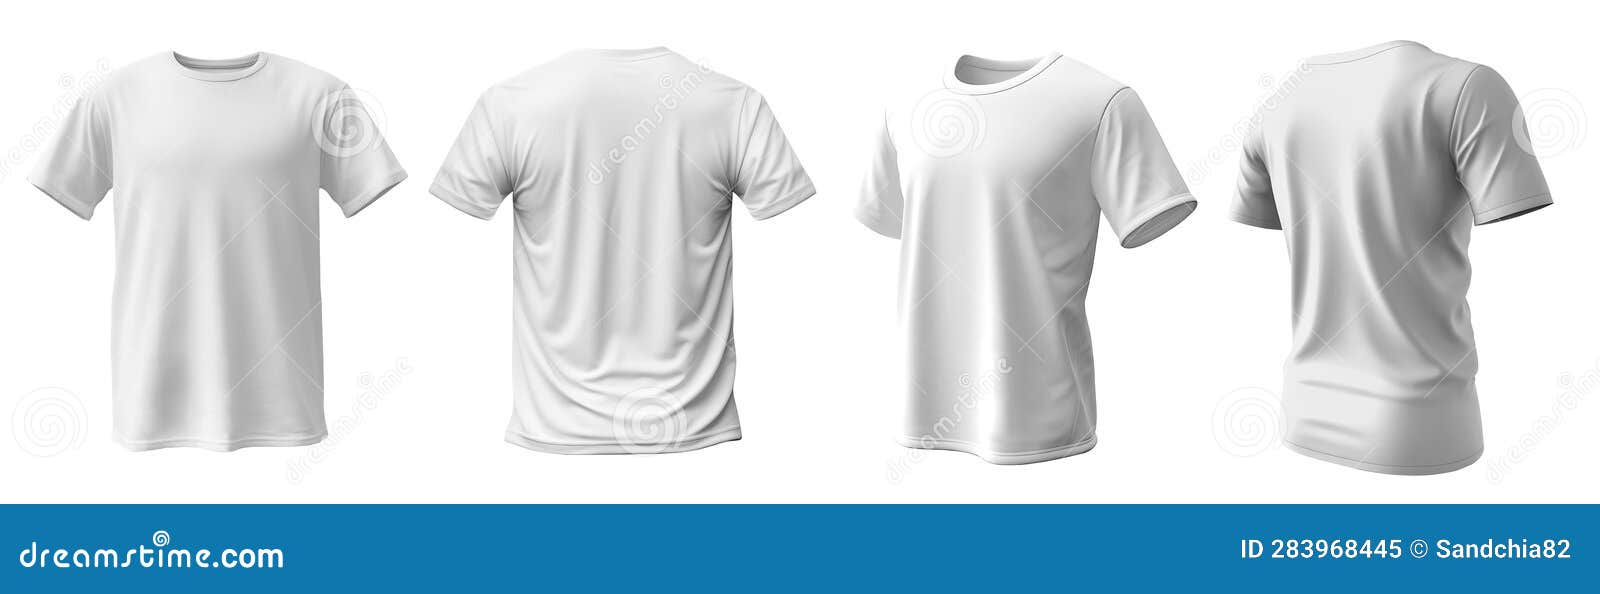 Set of White Tee T Shirt Round Neck Front, Back and Side View on ...